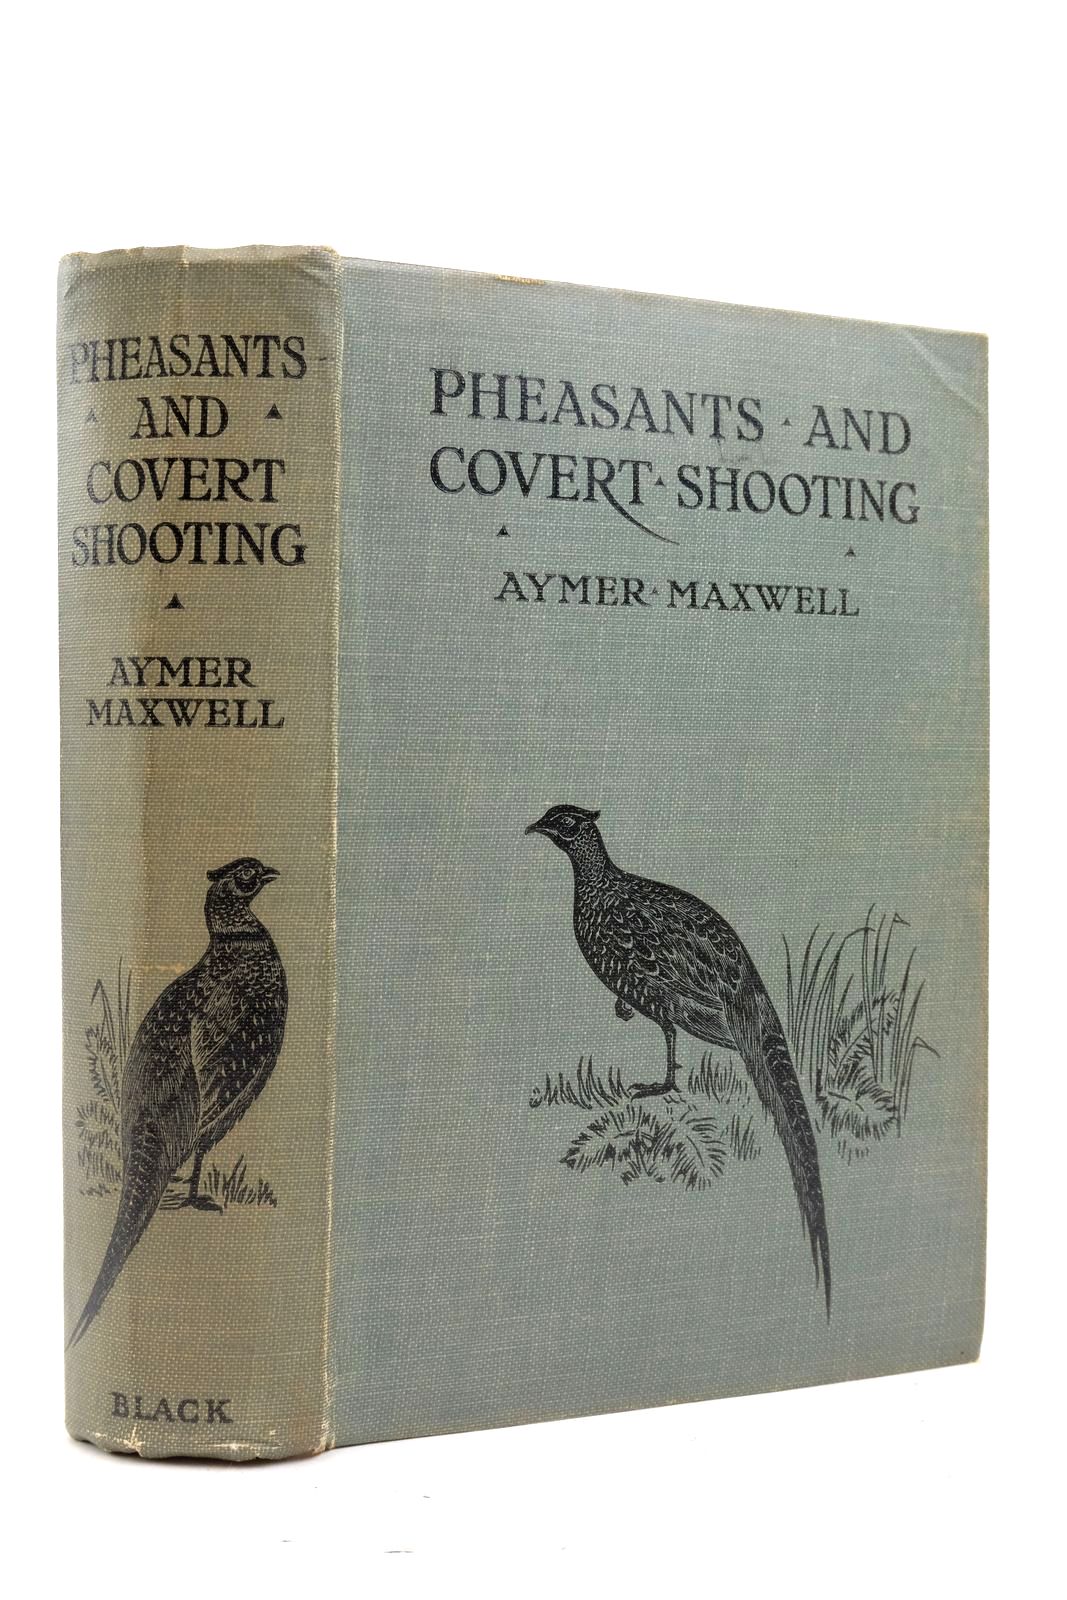 Photo of PHEASANTS AND COVERT SHOOTING written by Maxwell, Aymer illustrated by Rankin, George published by Adam & Charles Black (STOCK CODE: 2137555)  for sale by Stella & Rose's Books